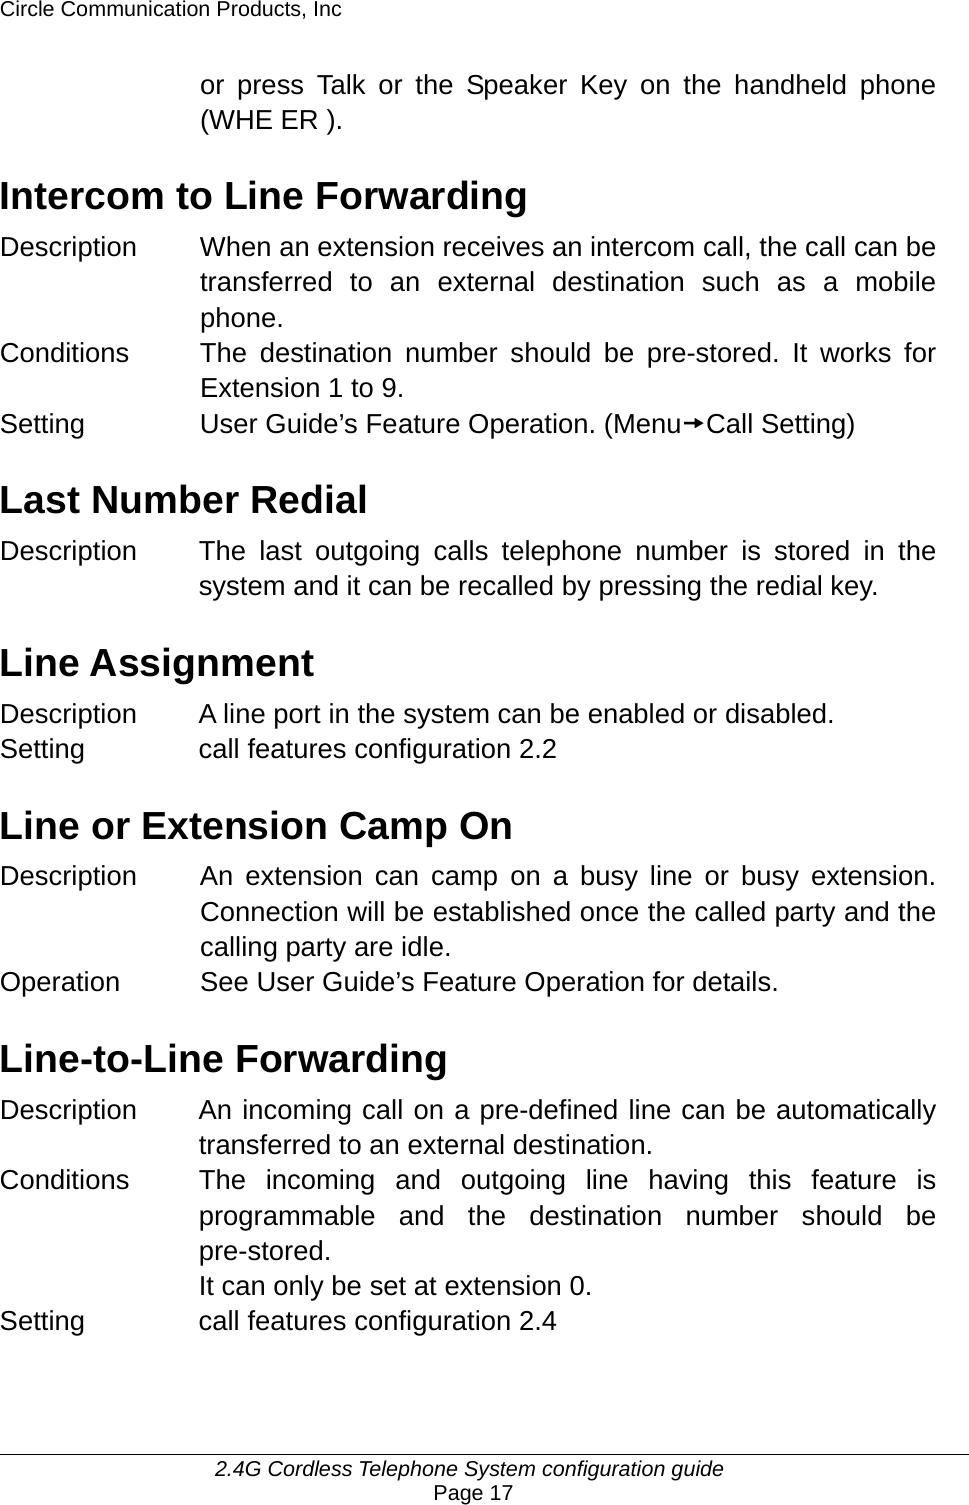 Circle Communication Products, Inc     2.4G Cordless Telephone System configuration guide Page 17 or press Talk or the Speaker Key on the handheld phone (WHE ER ).    Intercom to Line Forwarding Description When an extension receives an intercom call, the call can be transferred to an external destination such as a mobile phone. Conditions  The destination number should be pre-stored. It works for Extension 1 to 9. Setting  User Guide’s Feature Operation. (MenutCall Setting)  Last Number Redial Description The last outgoing calls telephone number is stored in the system and it can be recalled by pressing the redial key.  Line Assignment Description A line port in the system can be enabled or disabled.  Setting  call features configuration 2.2  Line or Extension Camp On Description  An extension can camp on a busy line or busy extension. Connection will be established once the called party and the calling party are idle. Operation  See User Guide’s Feature Operation for details.  Line-to-Line Forwarding Description  An incoming call on a pre-defined line can be automatically transferred to an external destination. Conditions  The incoming and outgoing line having this feature is programmable and the destination number should be pre-stored. It can only be set at extension 0. Setting  call features configuration 2.4  